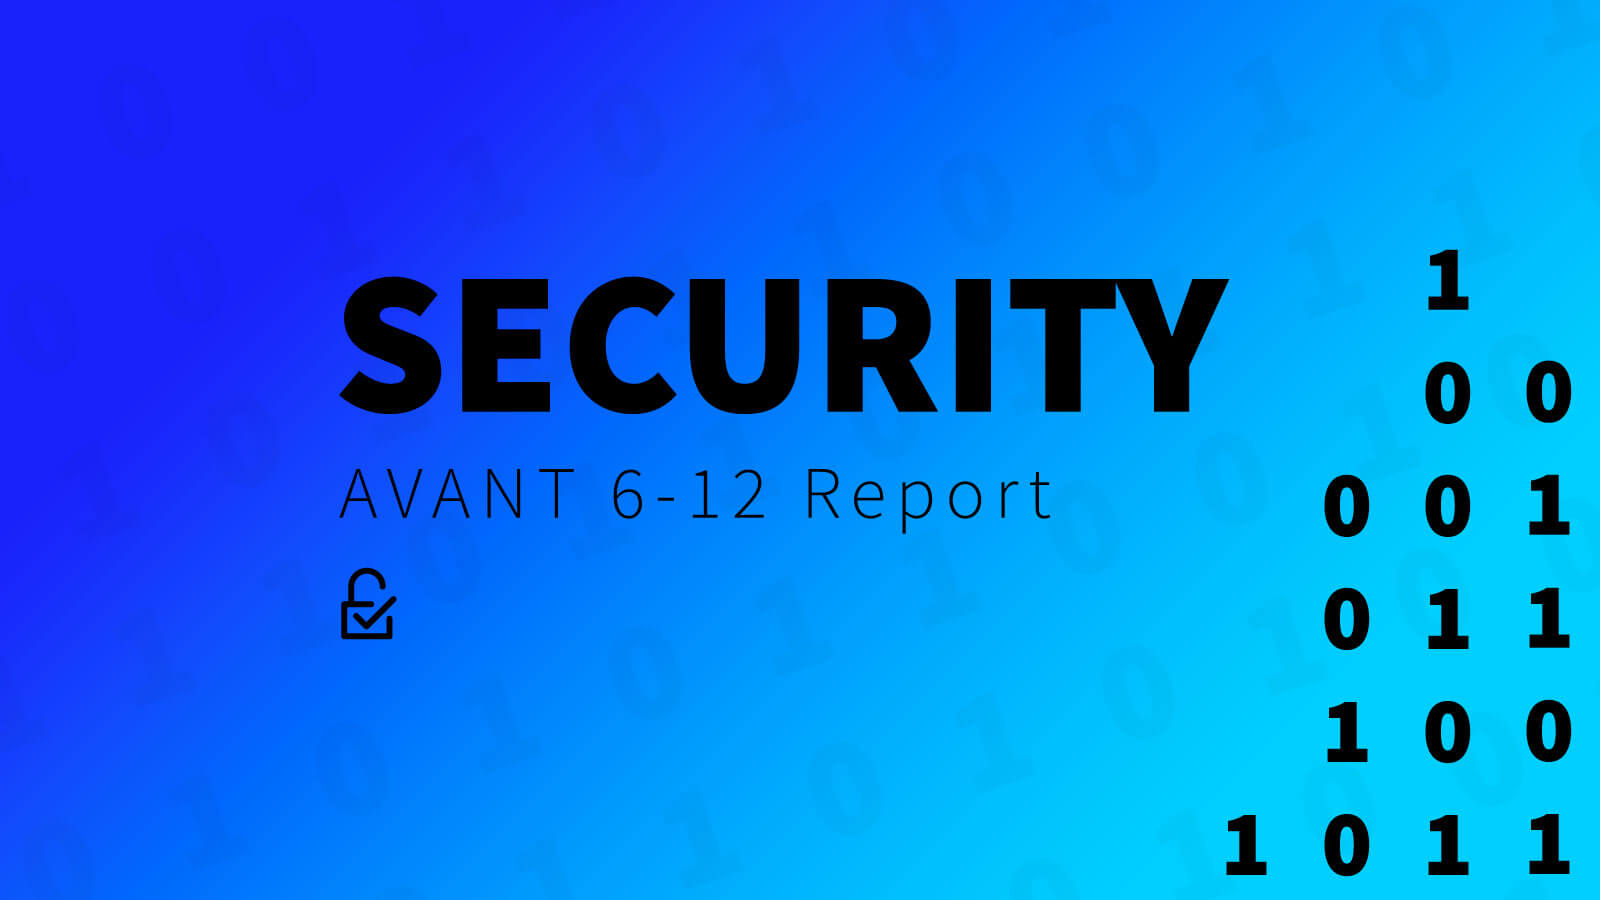 AVANT Analytics Launches “6-12 Report” Providing Market Research on IT Security